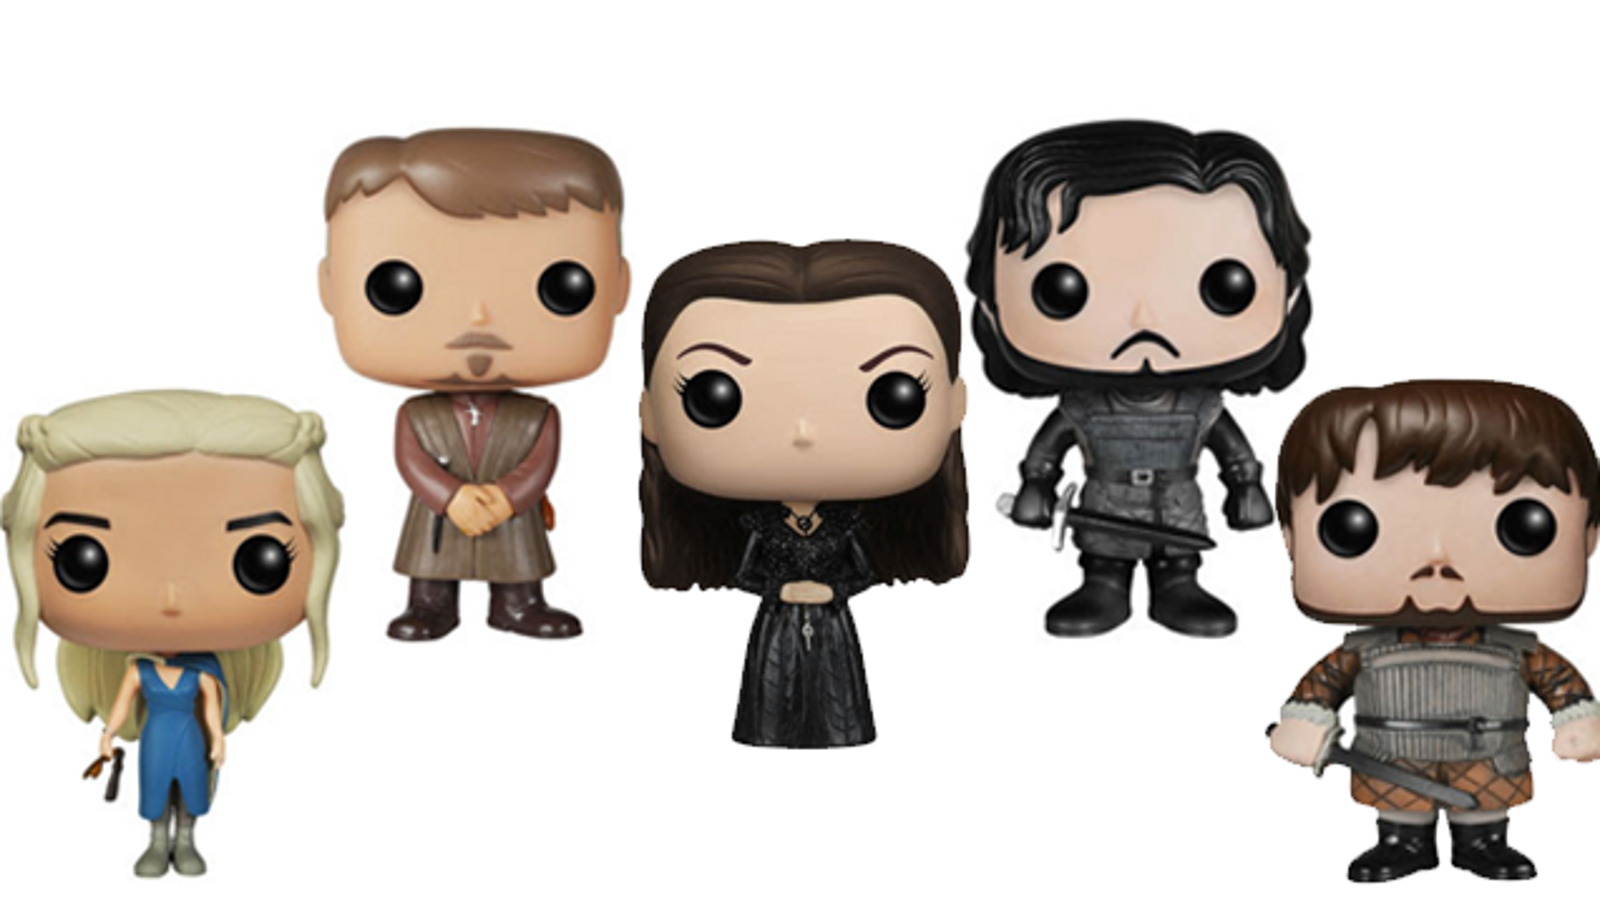 Rejoice, the latest Game of Thrones Pop! Vinyls finally gives us Sansa